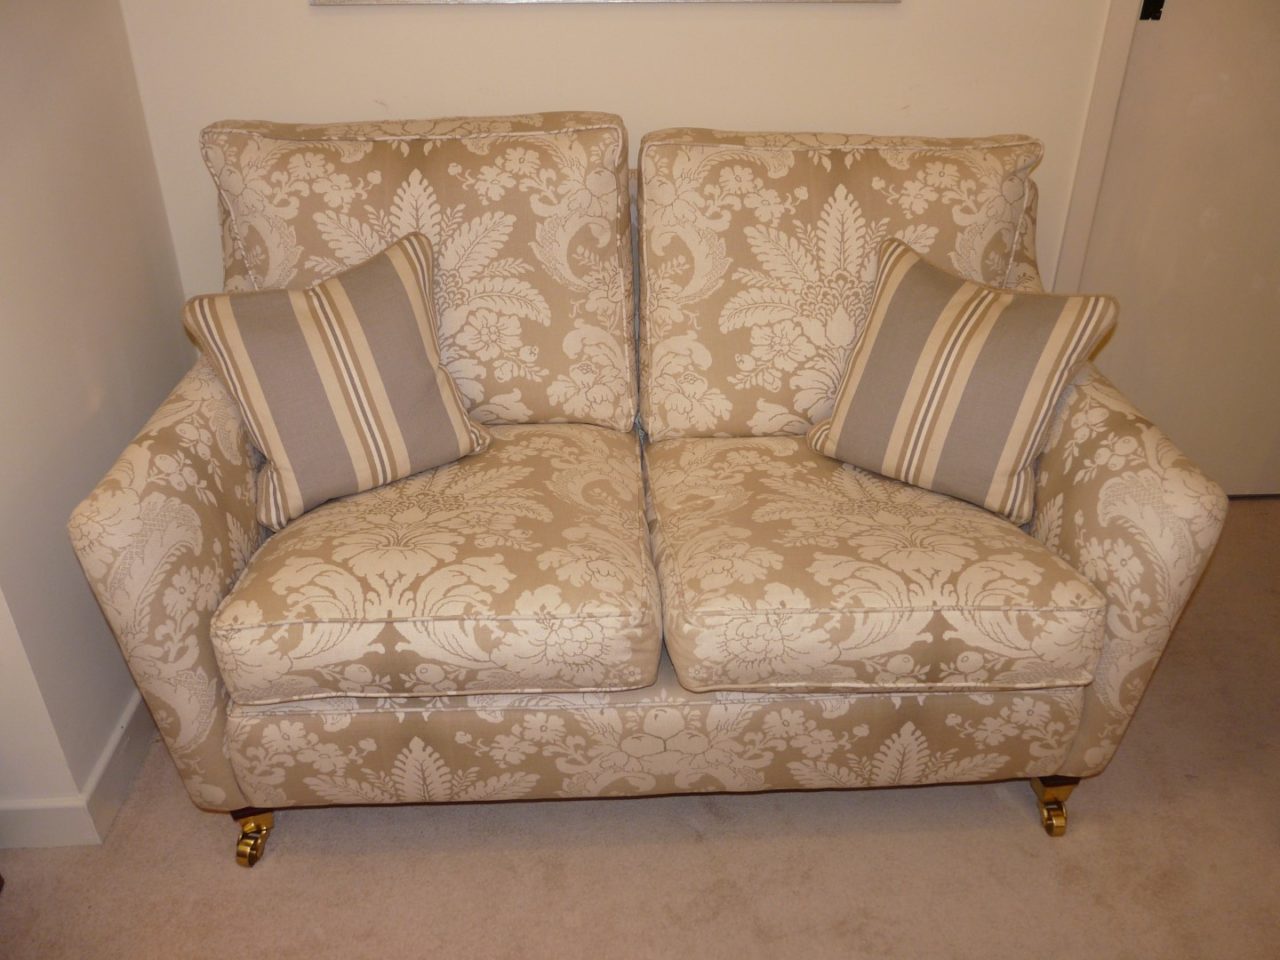 Small 2 seater sofa, low arms, wooden feet, contrasting scatters.